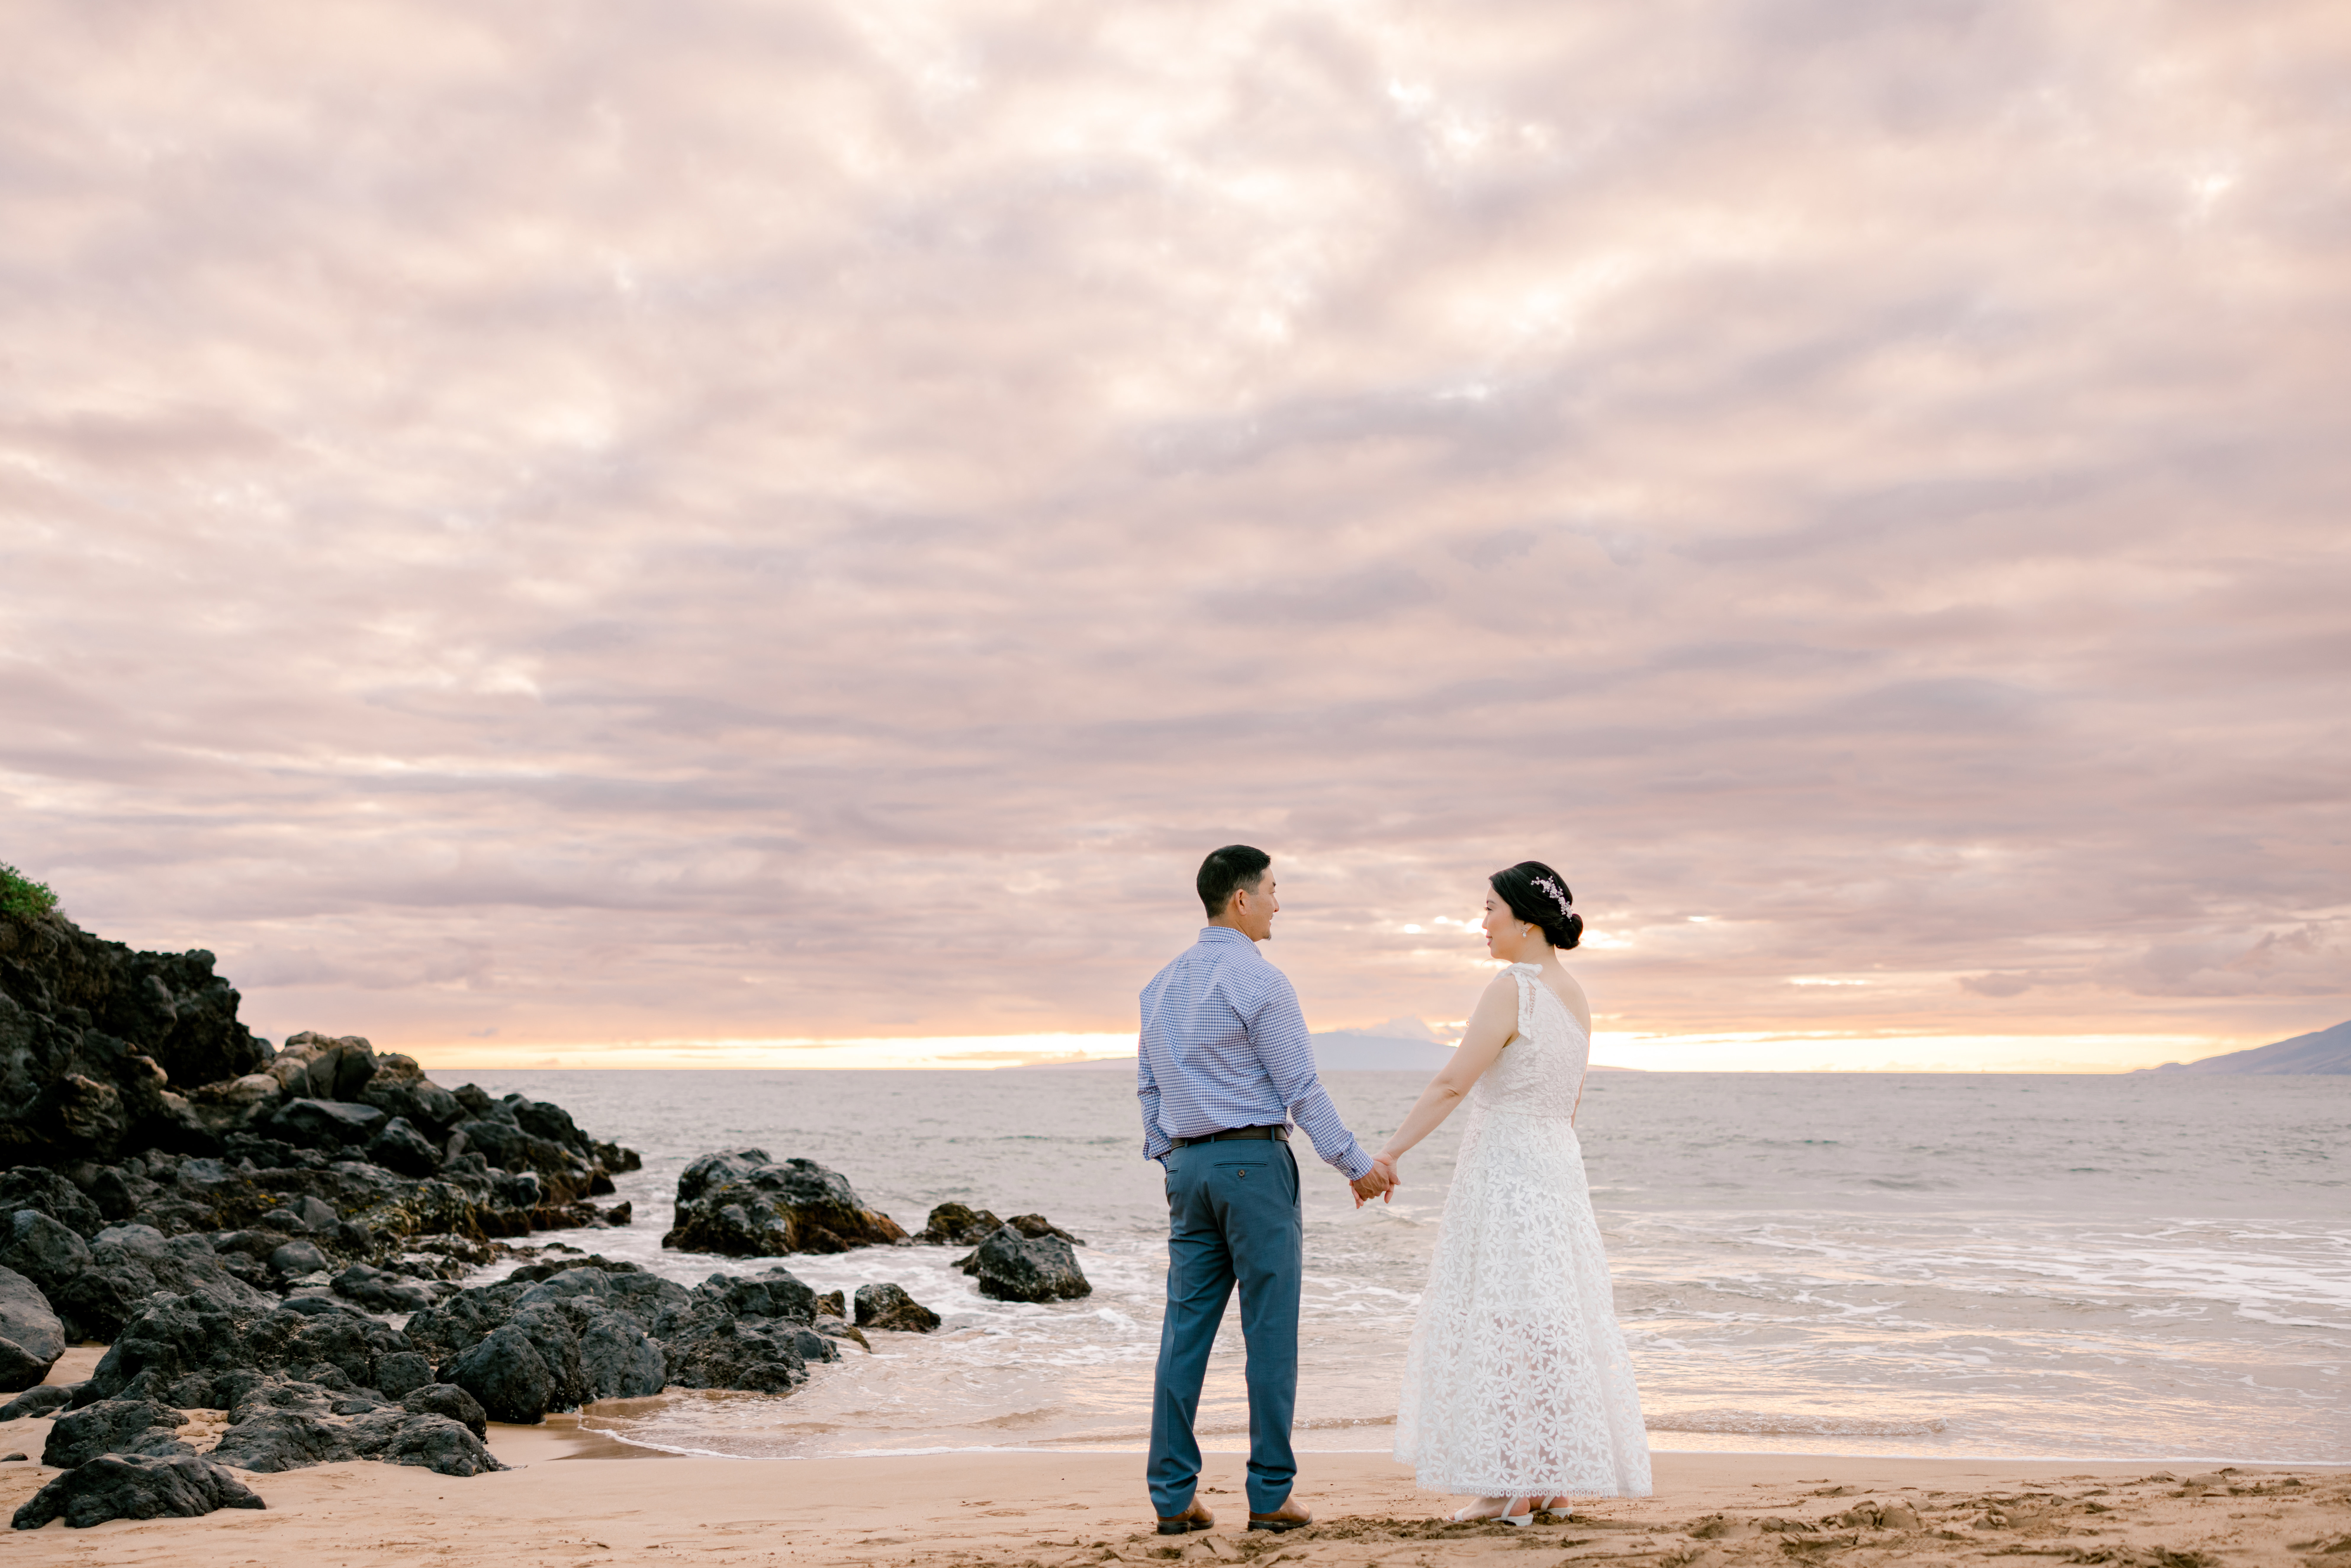 Man and woman standing in sand holding hands during sunset in Maui